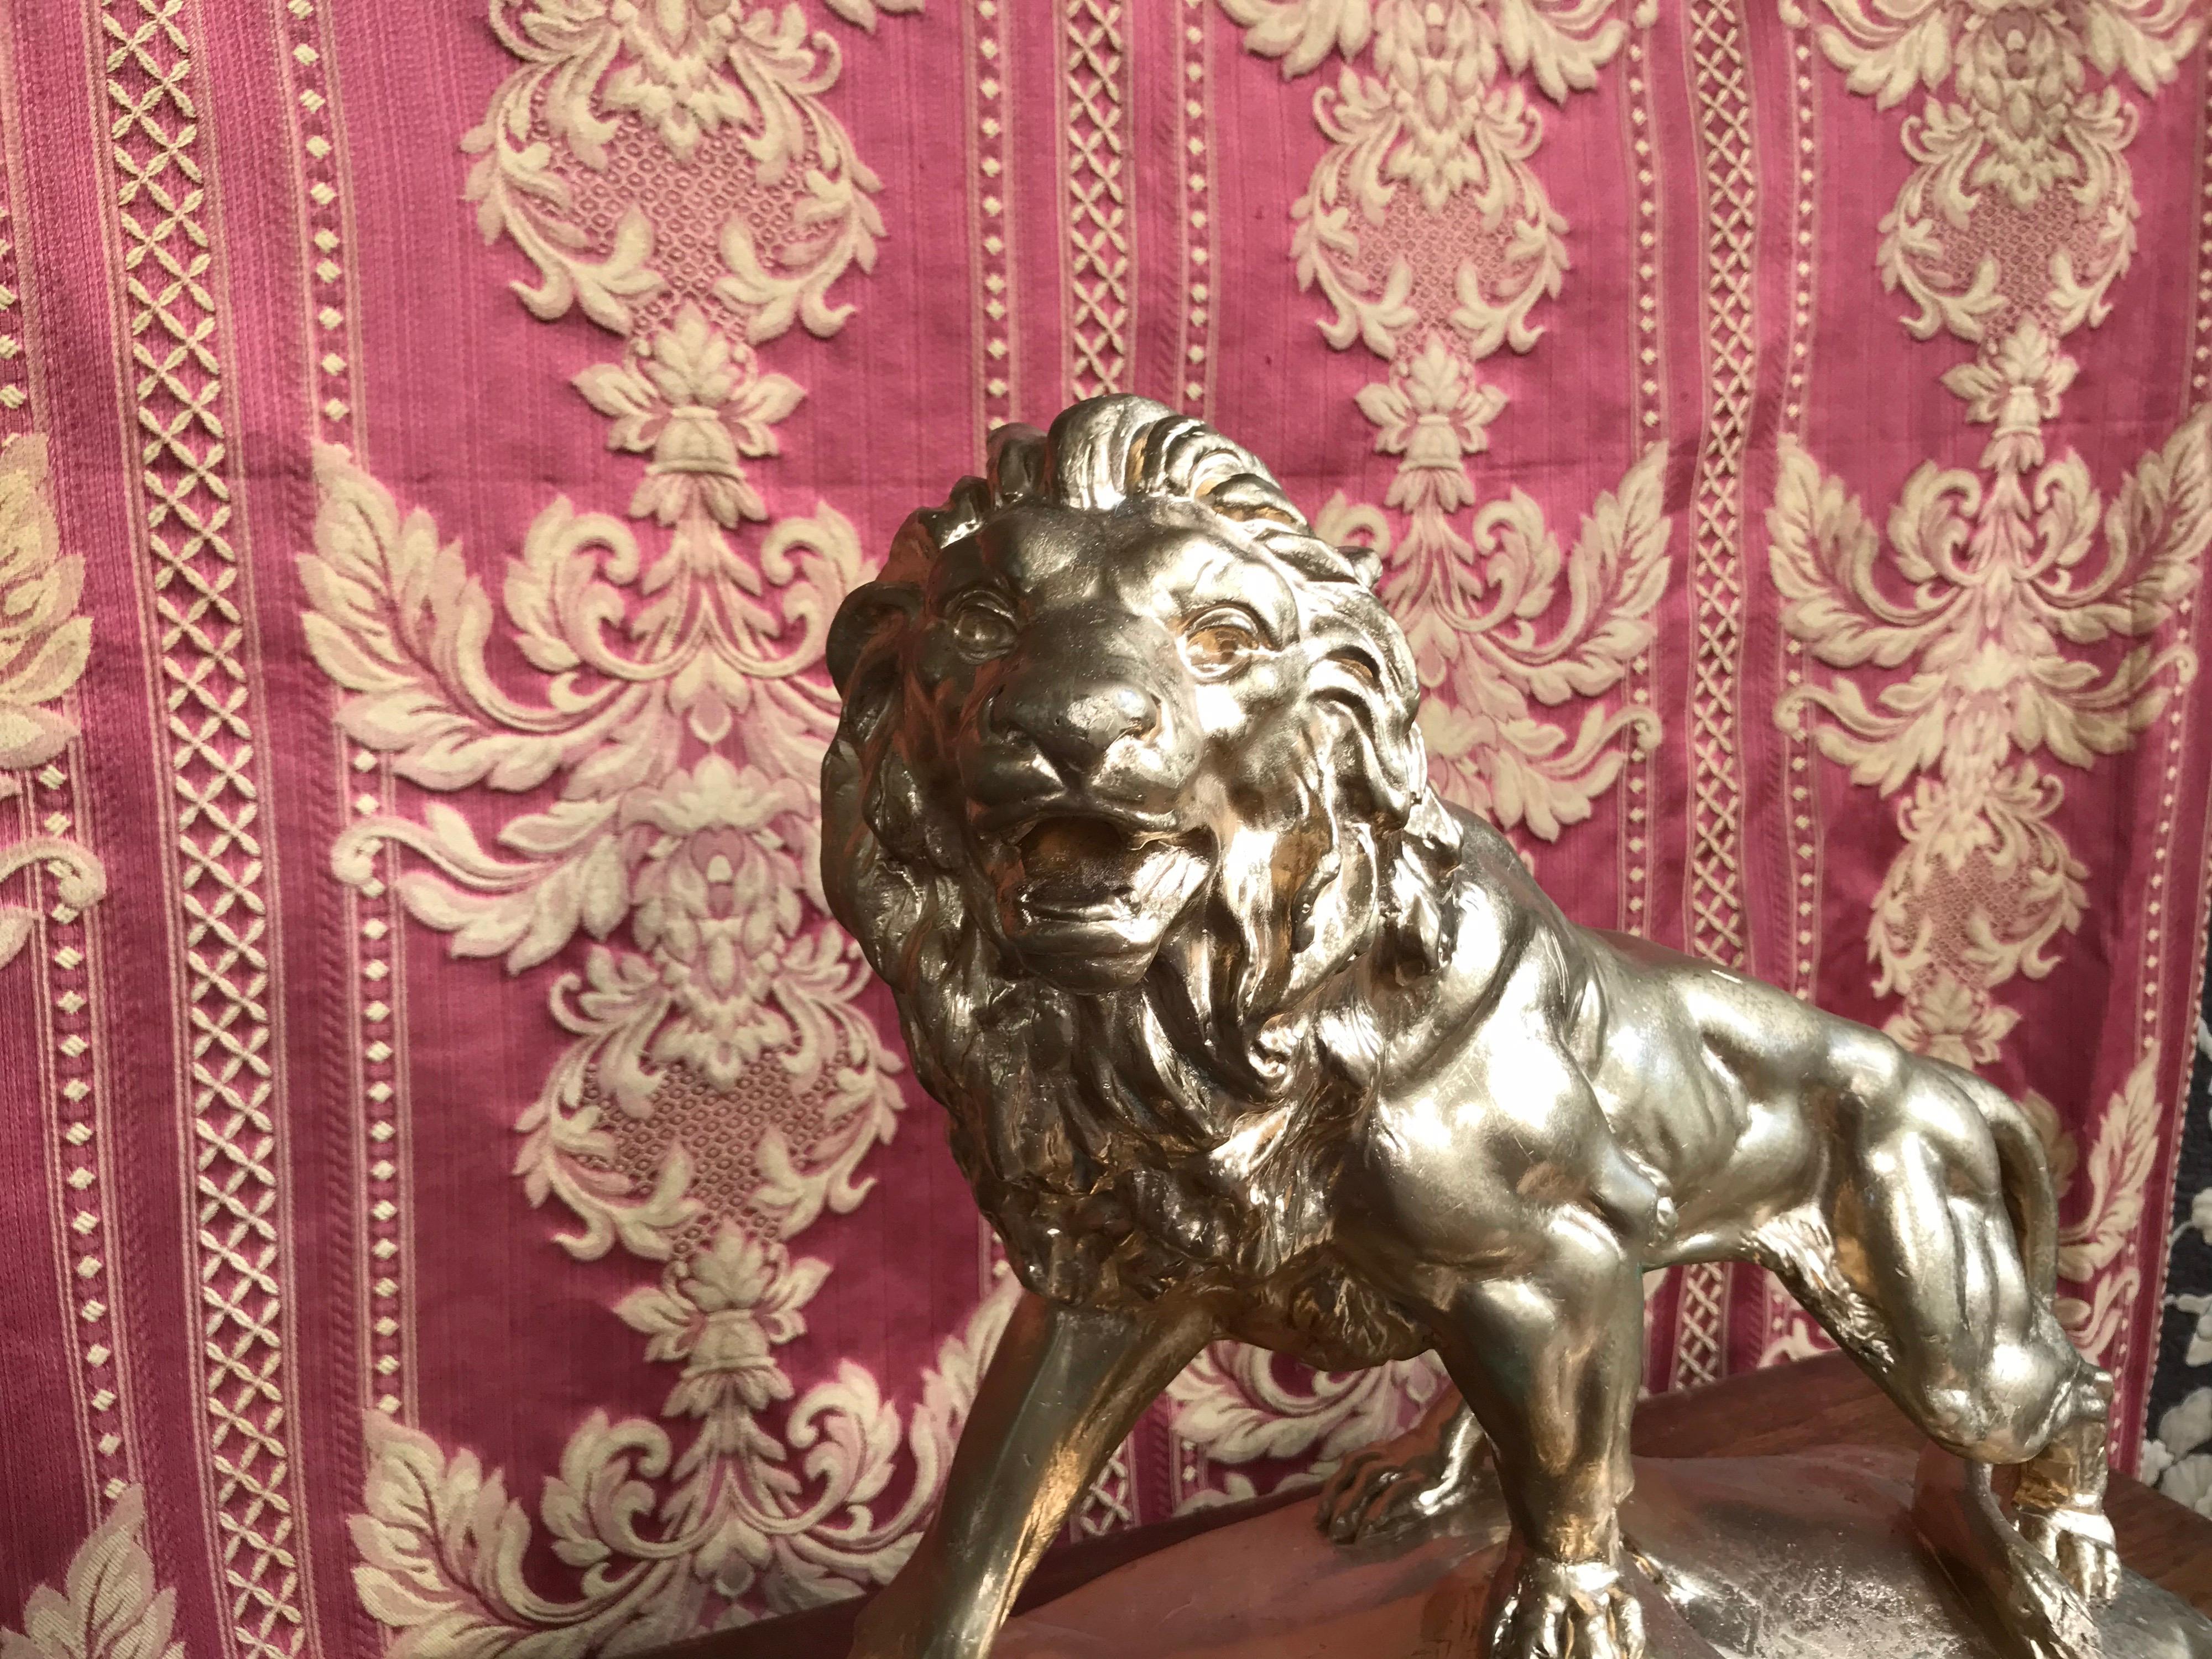 Beautiful lion standing on a rock, its mouth half open ready to roar.
Golden plaster
1950s work.